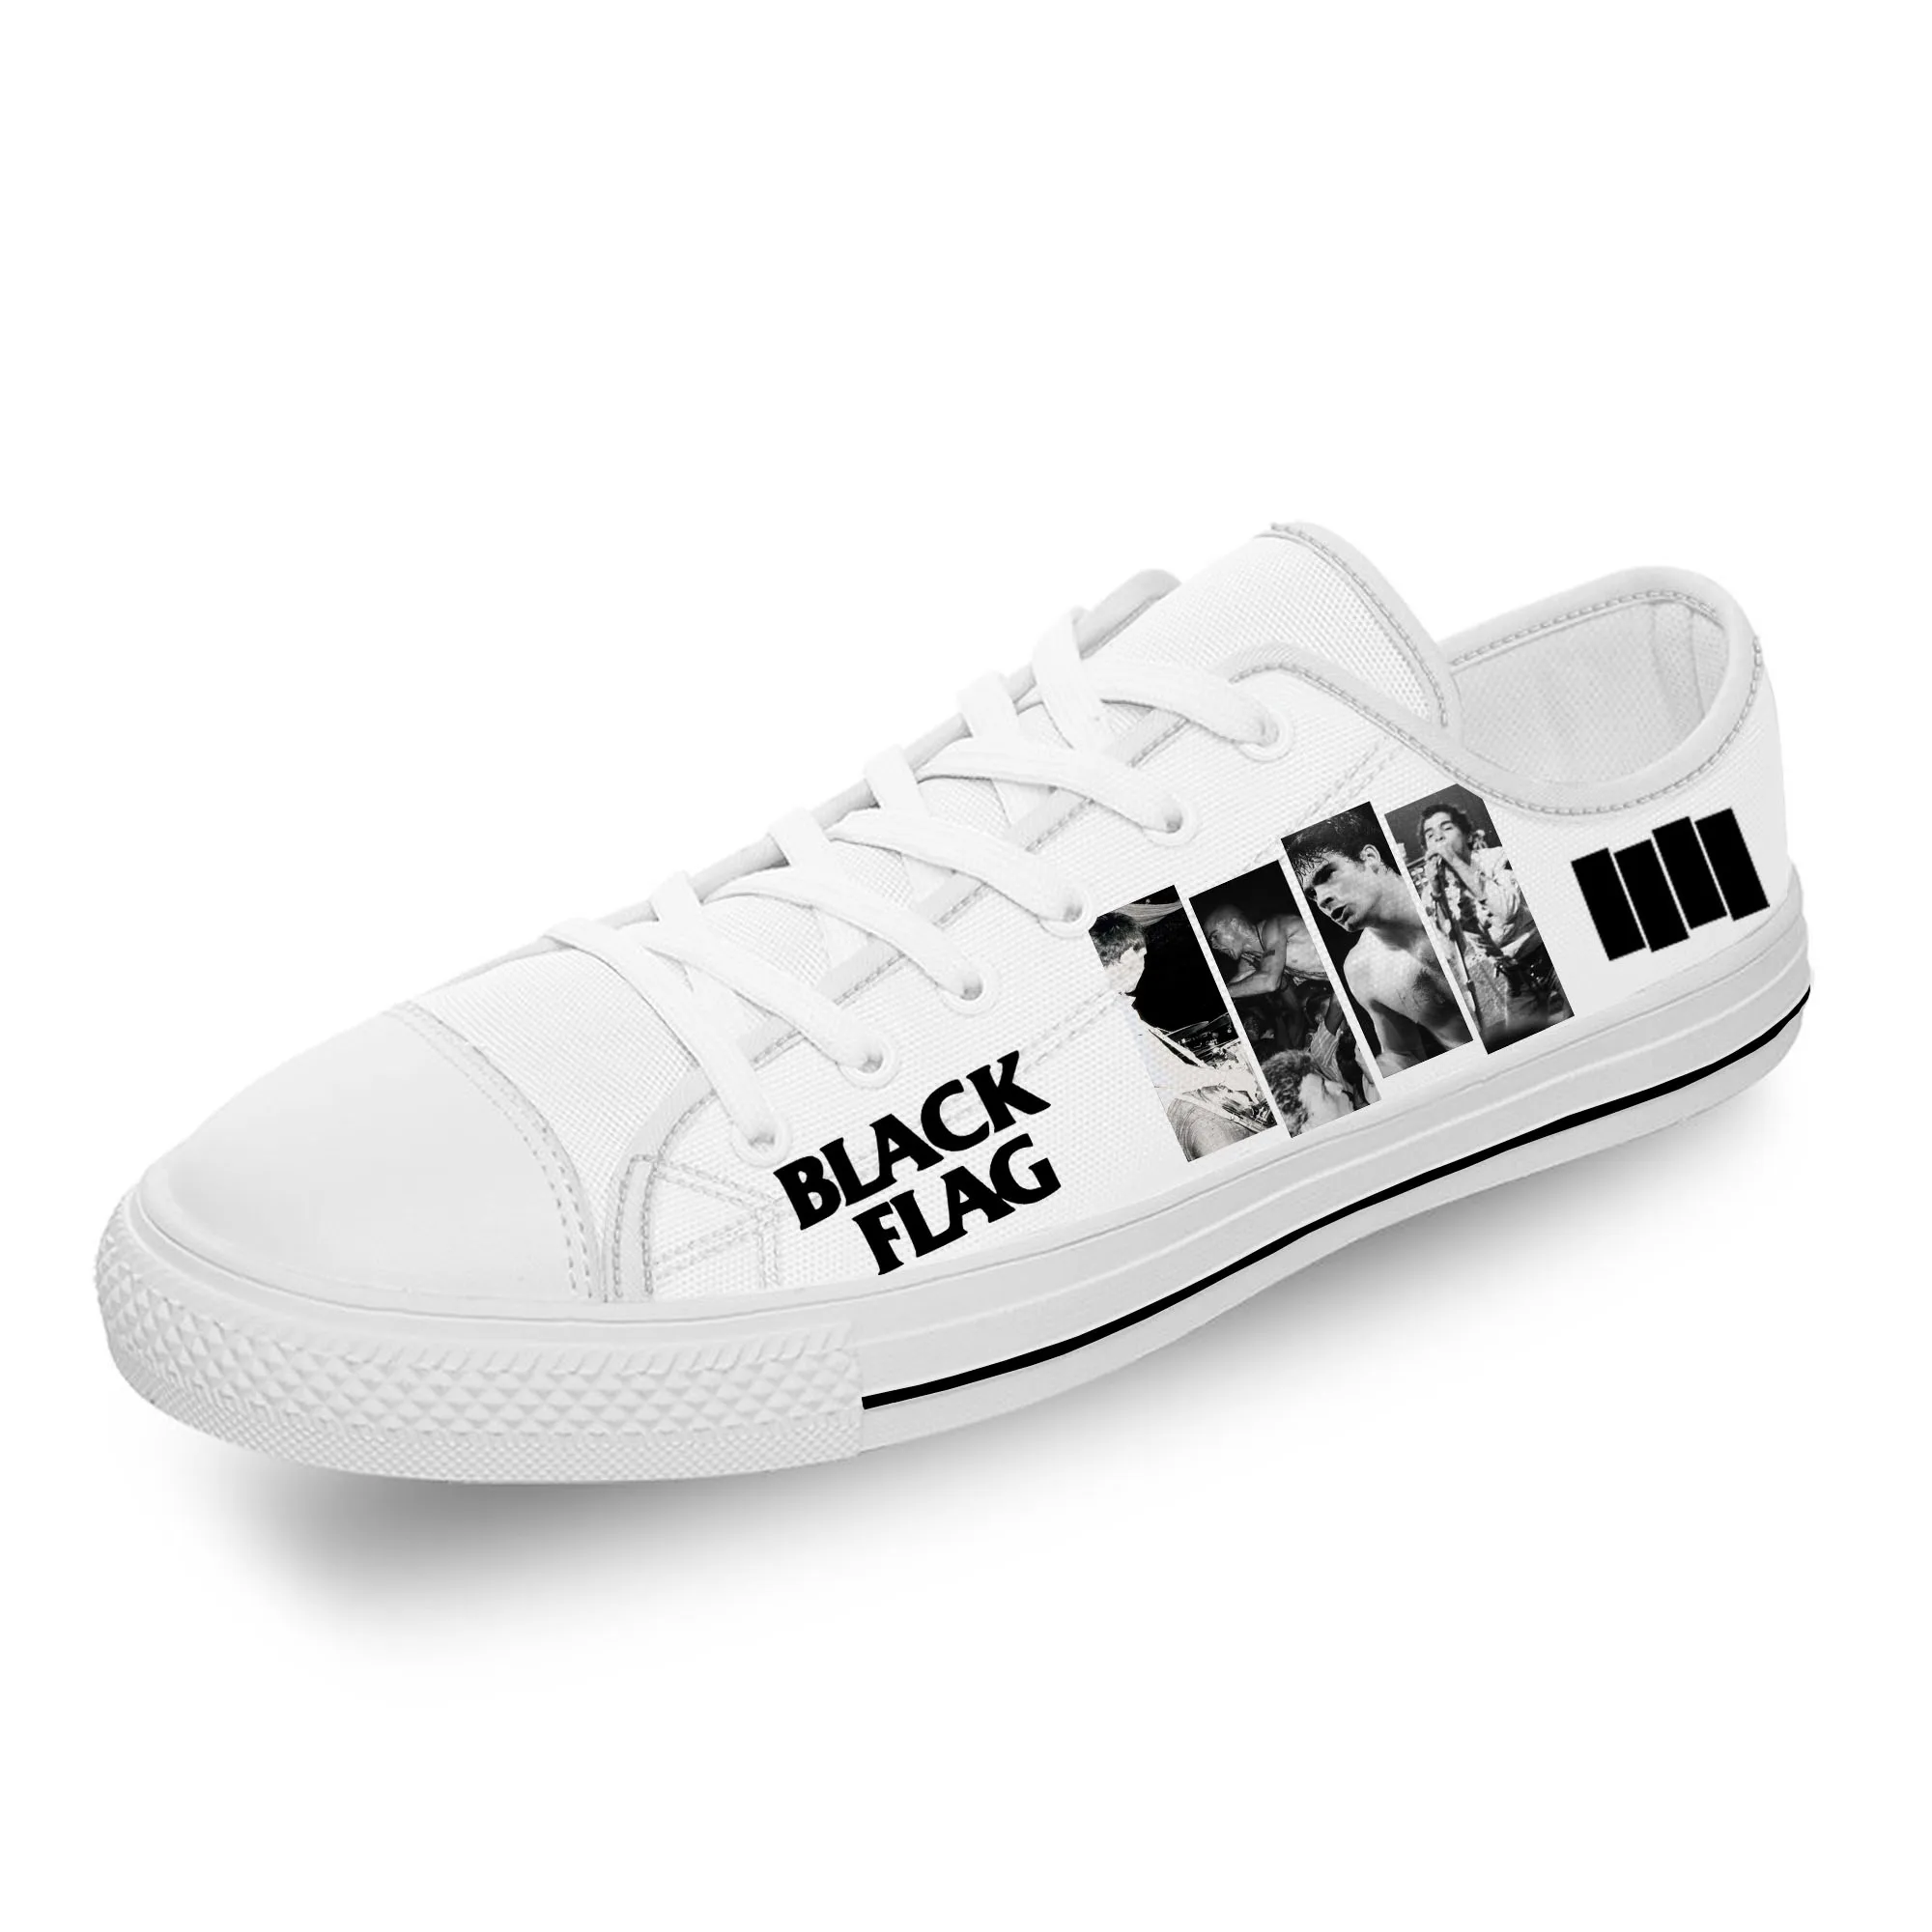 BLACK FLAG Rock Band Low Top Sneakers Mens Womens Teenager Casual Shoes Canvas Running Shoes 3D Print Designer Lightweight shoe